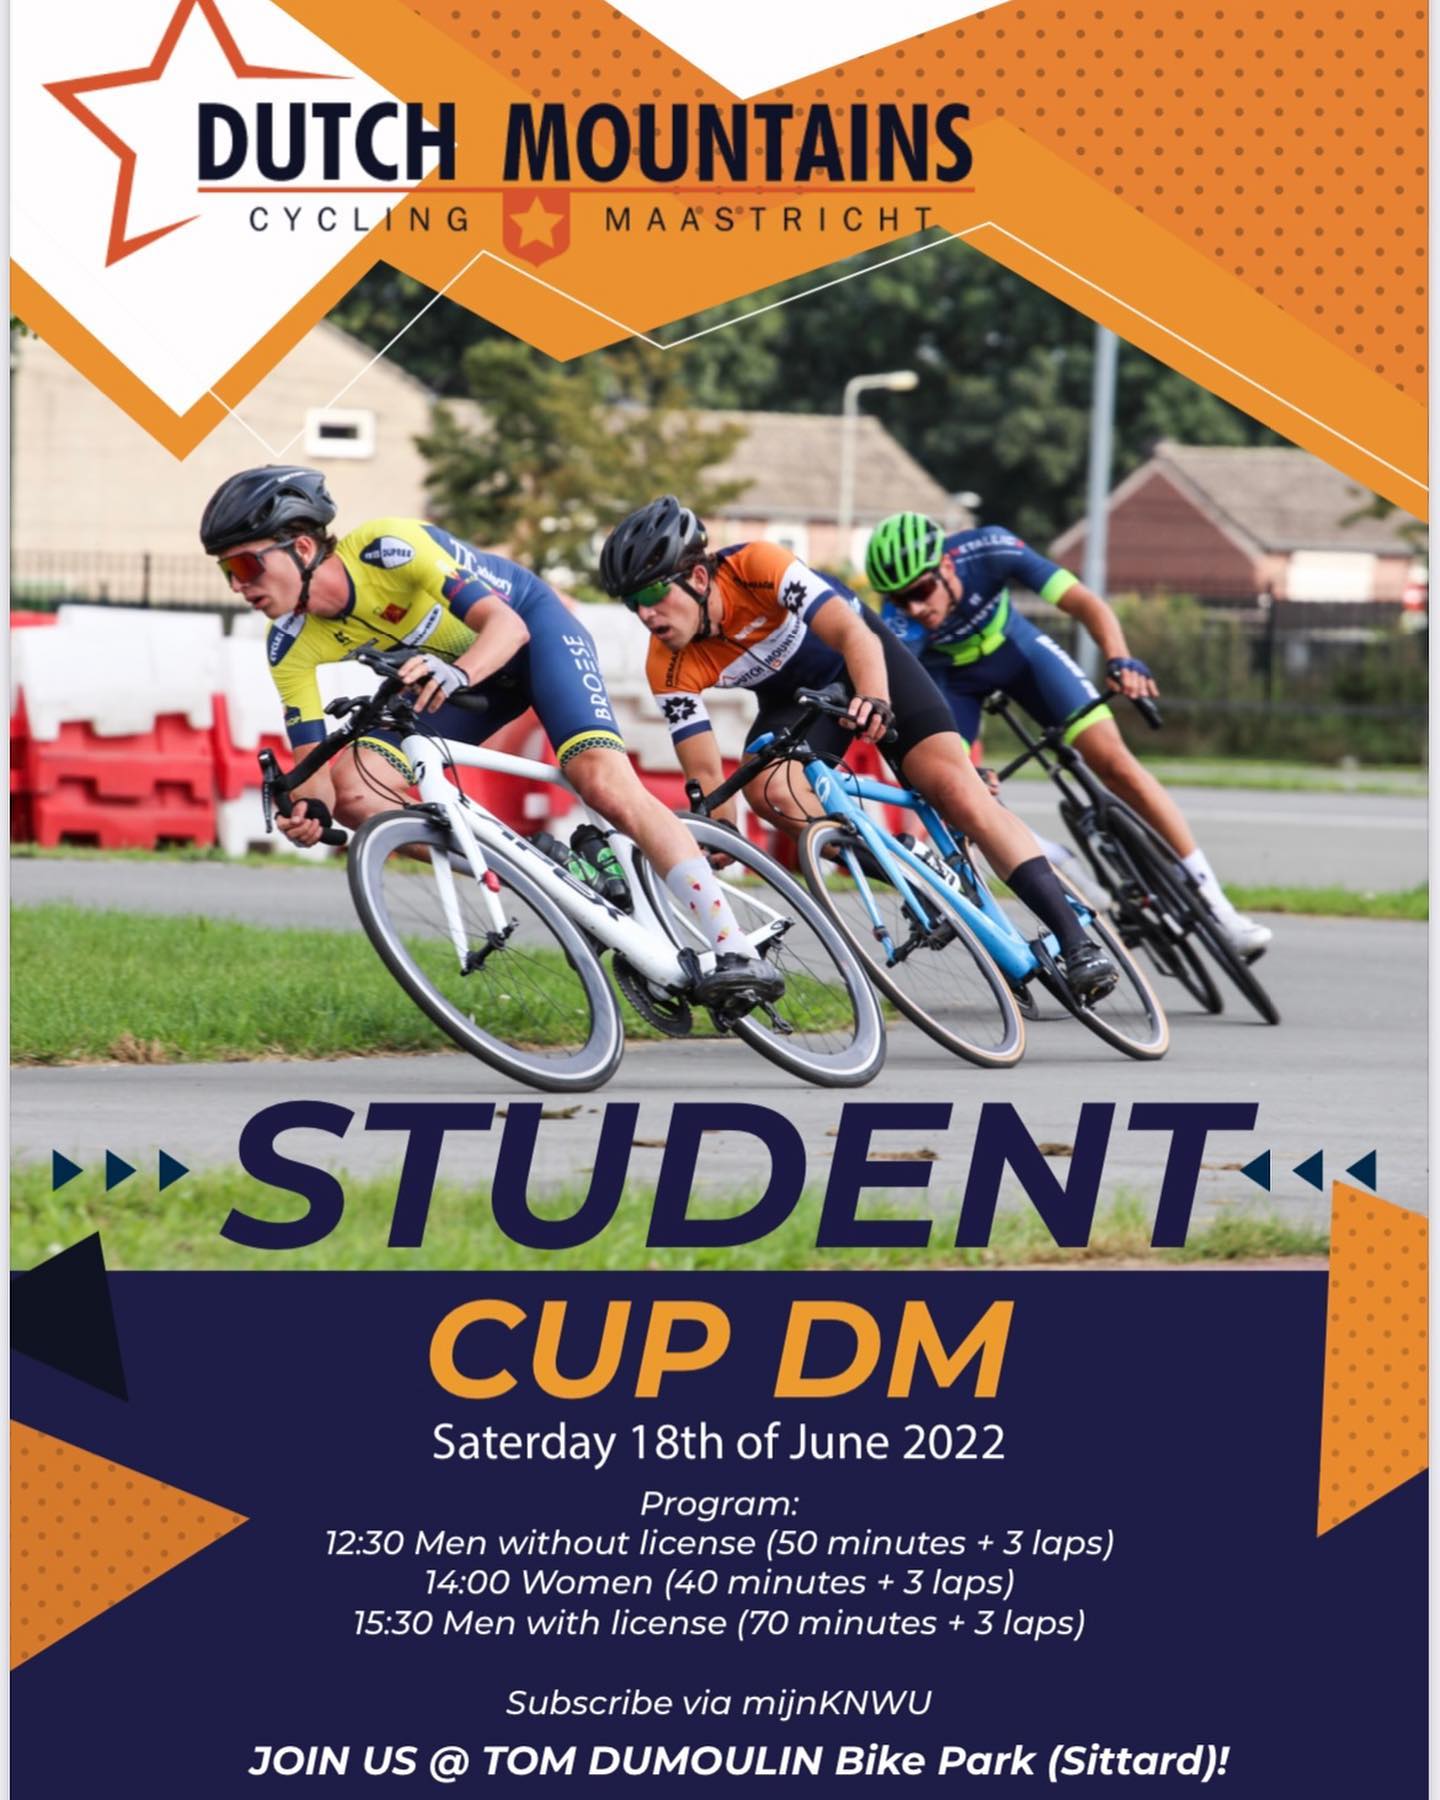 ⭐️Student Cup DM⭐️

On Saturday 18th of June, we will organize our own student cup at the Tom Dumoulin Bike Park. 
Subscription via mijnKNWU will open soon. 

Let’s see who will be the fastest on this track! 🏁
🧡💙